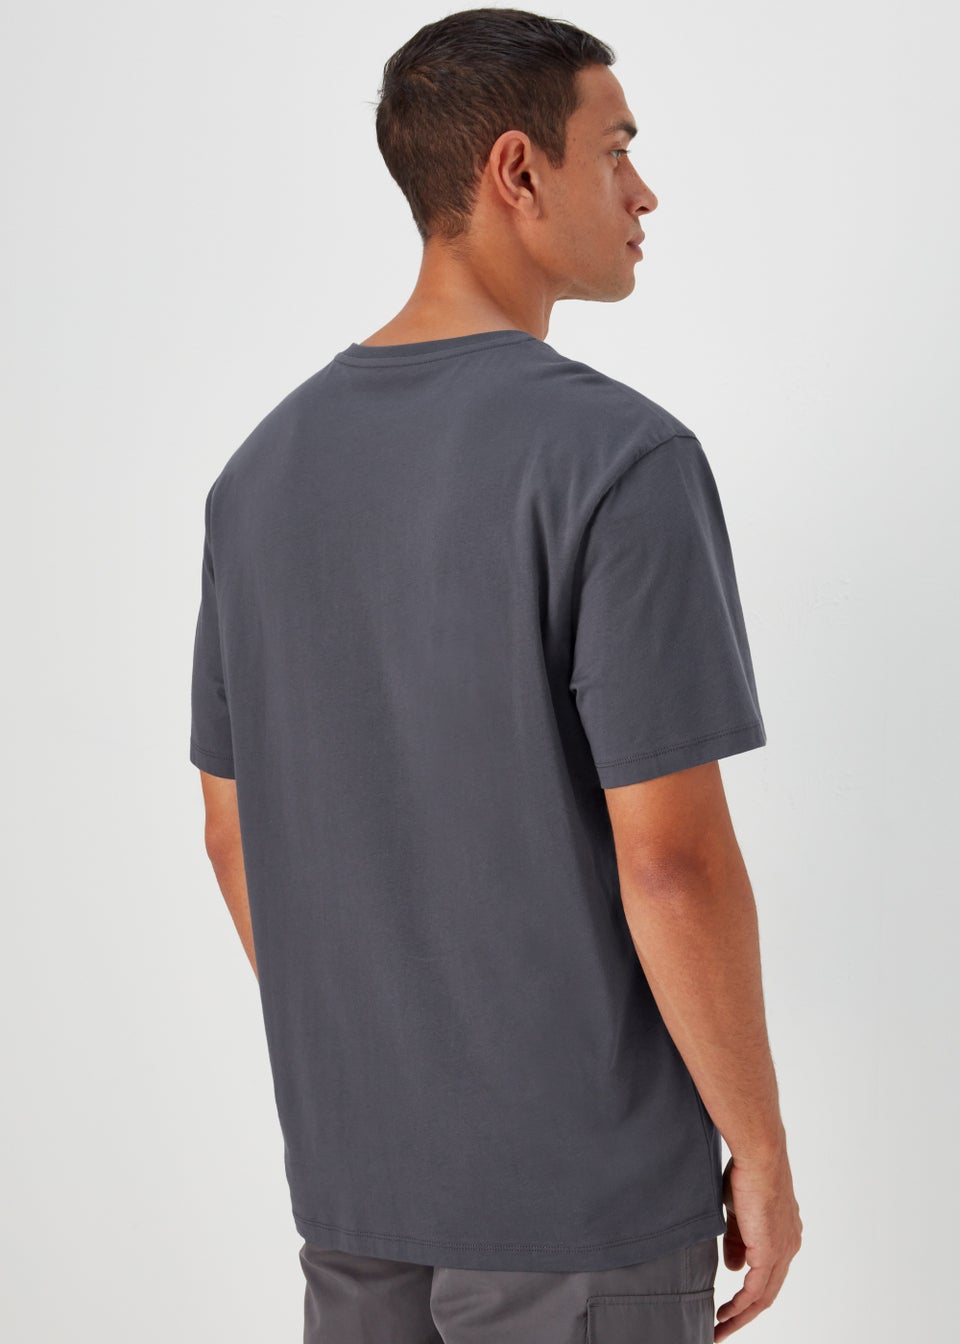 US Athletic Charcoal Live More Oversized T-Shirt